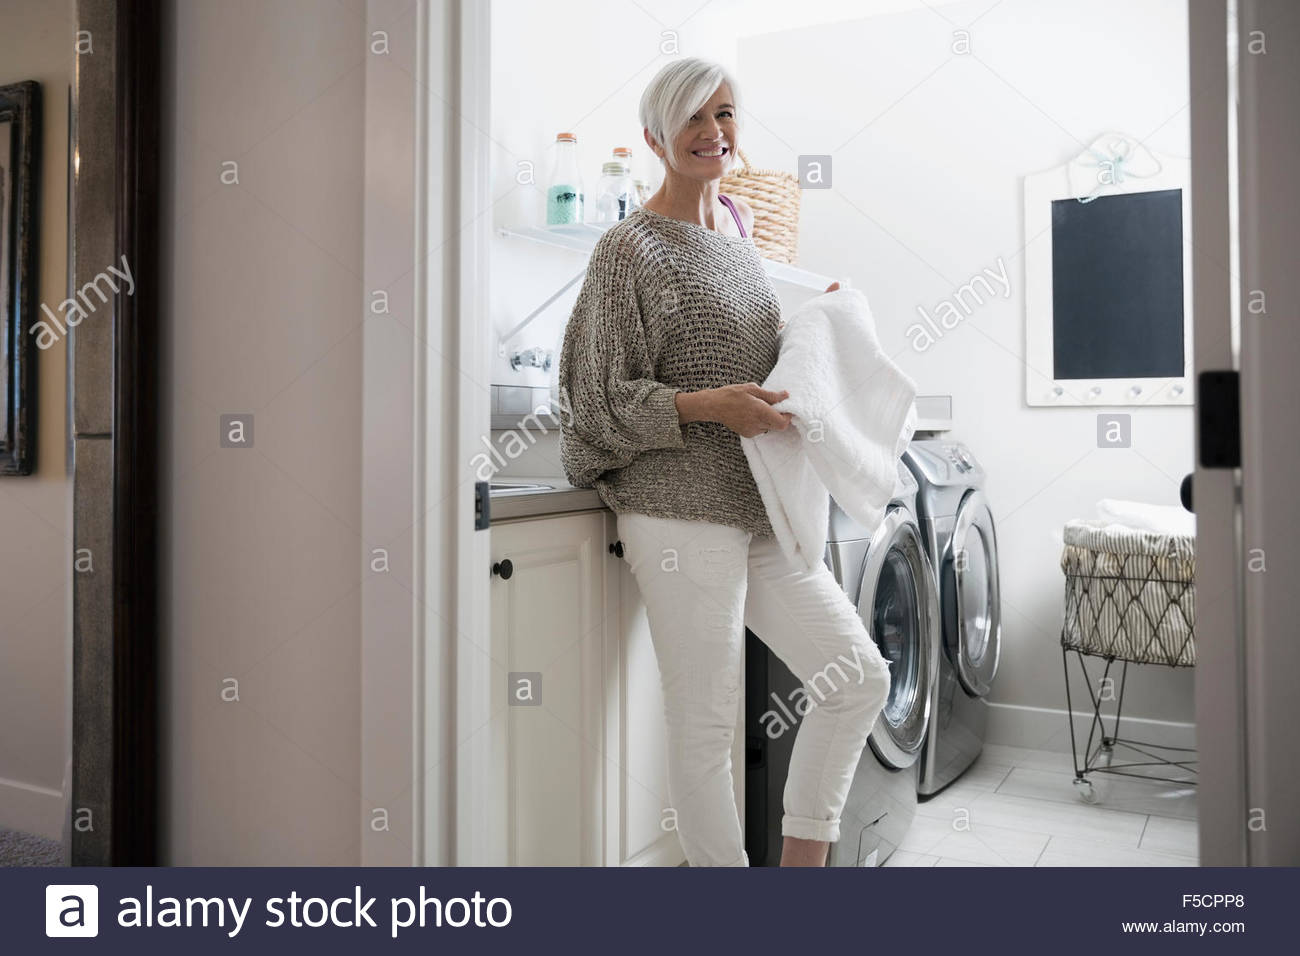 Portrait smiling woman folding towels in laundry room Stock Photo